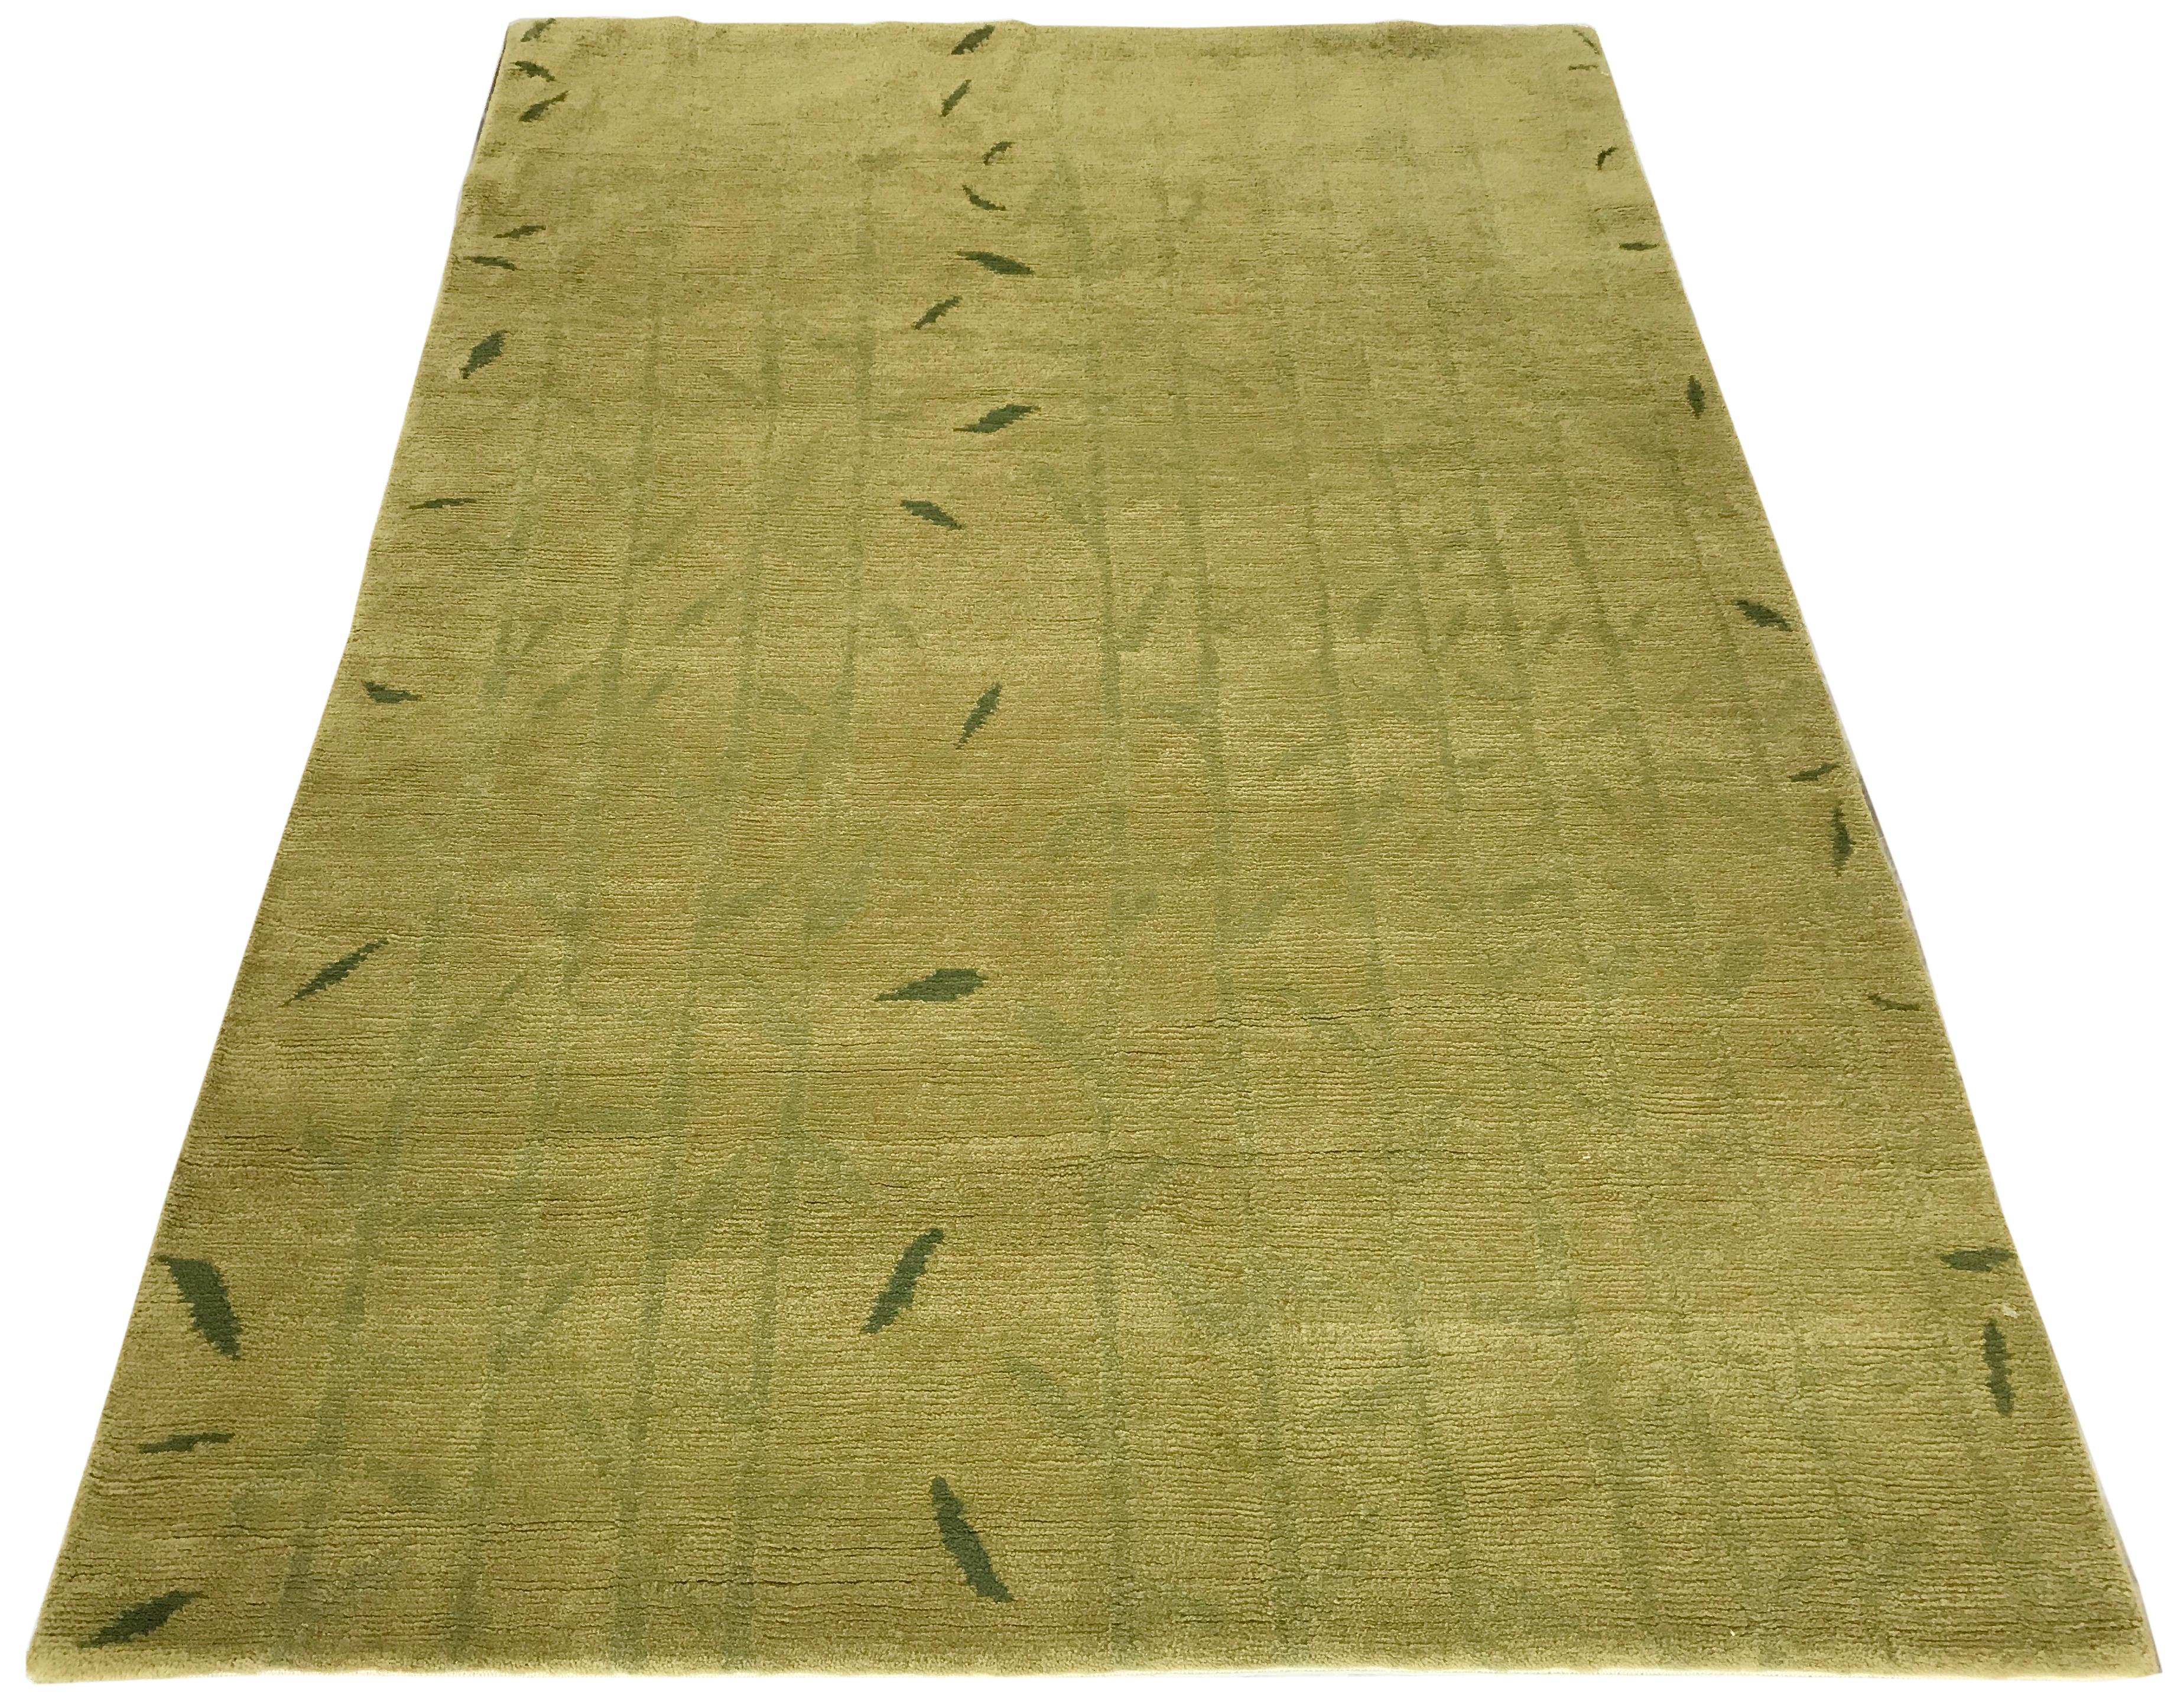 Bring the calming effect of nature indoors with this charming Tibetan-style rug. Subtle bamboo stalks and bold falling leaves create a botanical overlay on a warm golden wool and silk canvas. The soft low pile is both comforting underfoot and